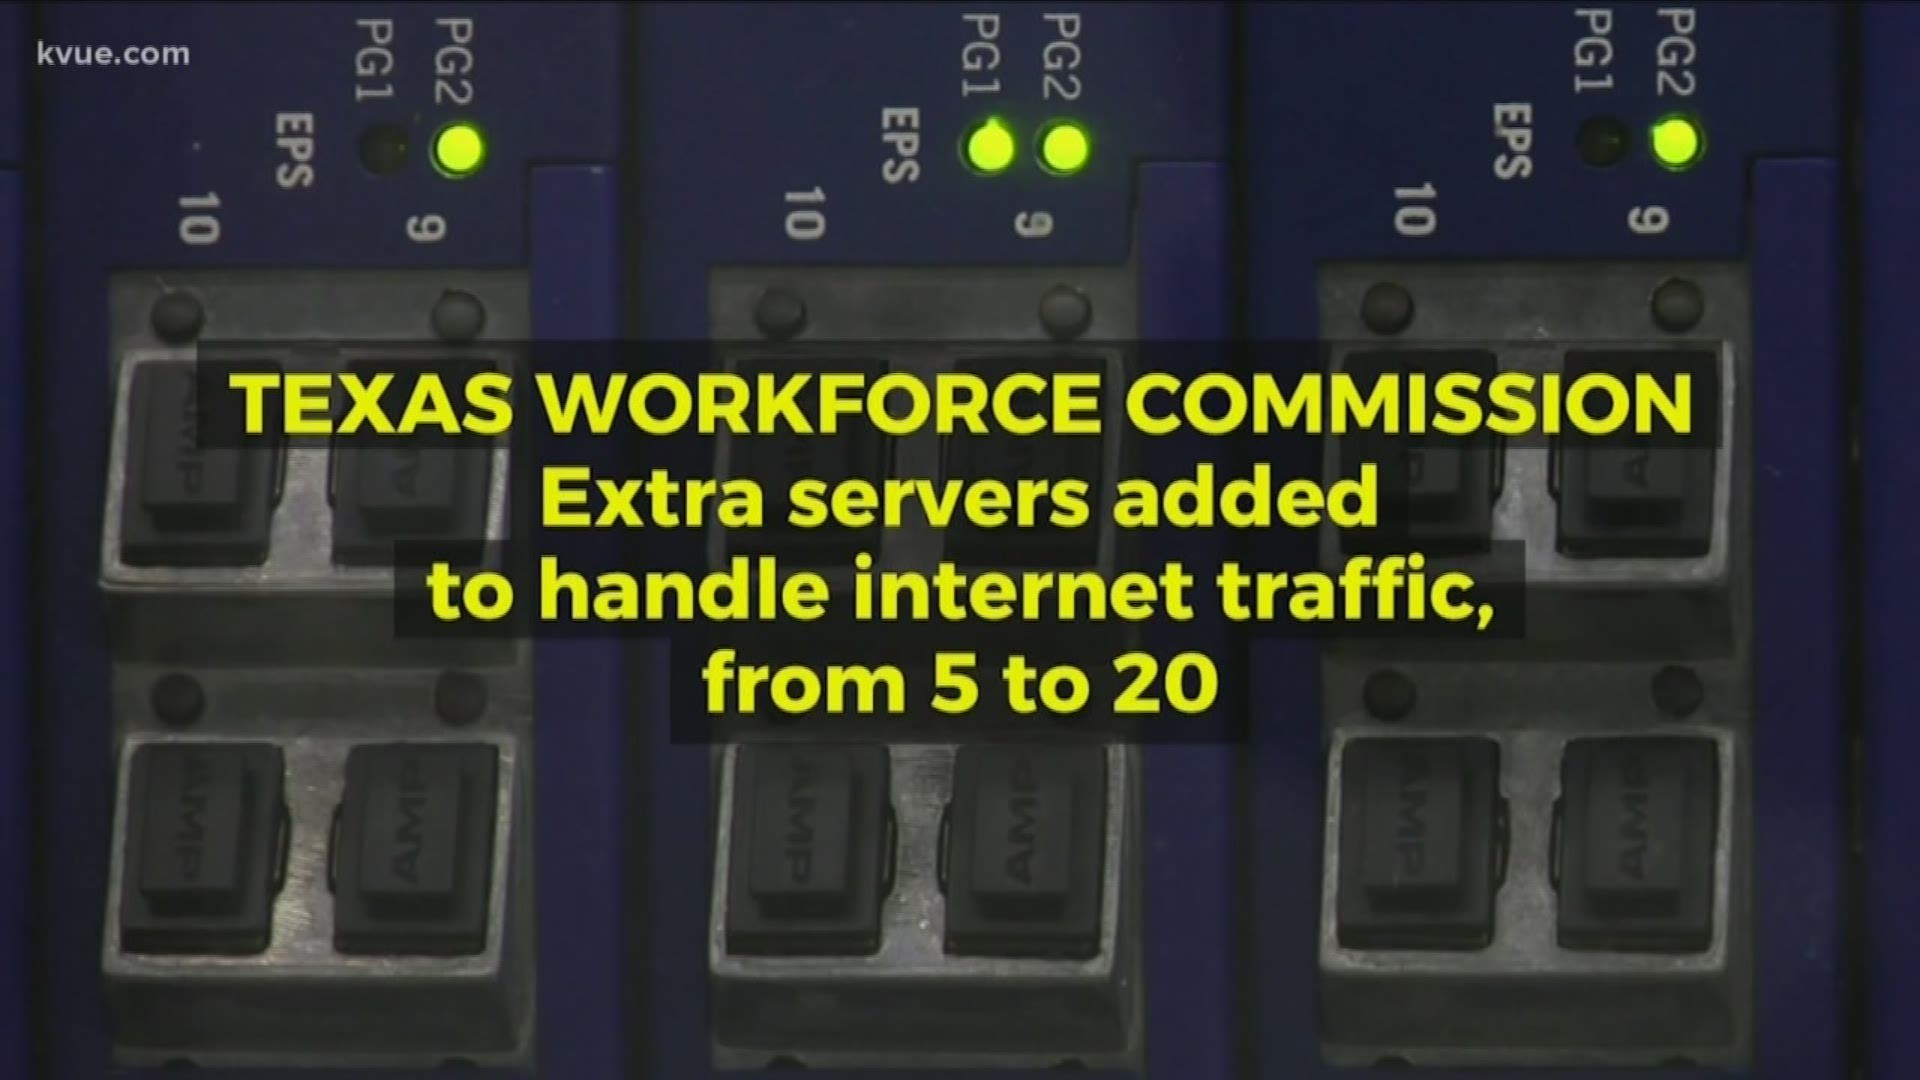 The Texas Workforce Commission has added extra servers and is hiring extra workers to try to handle the influx of unemployment claims.